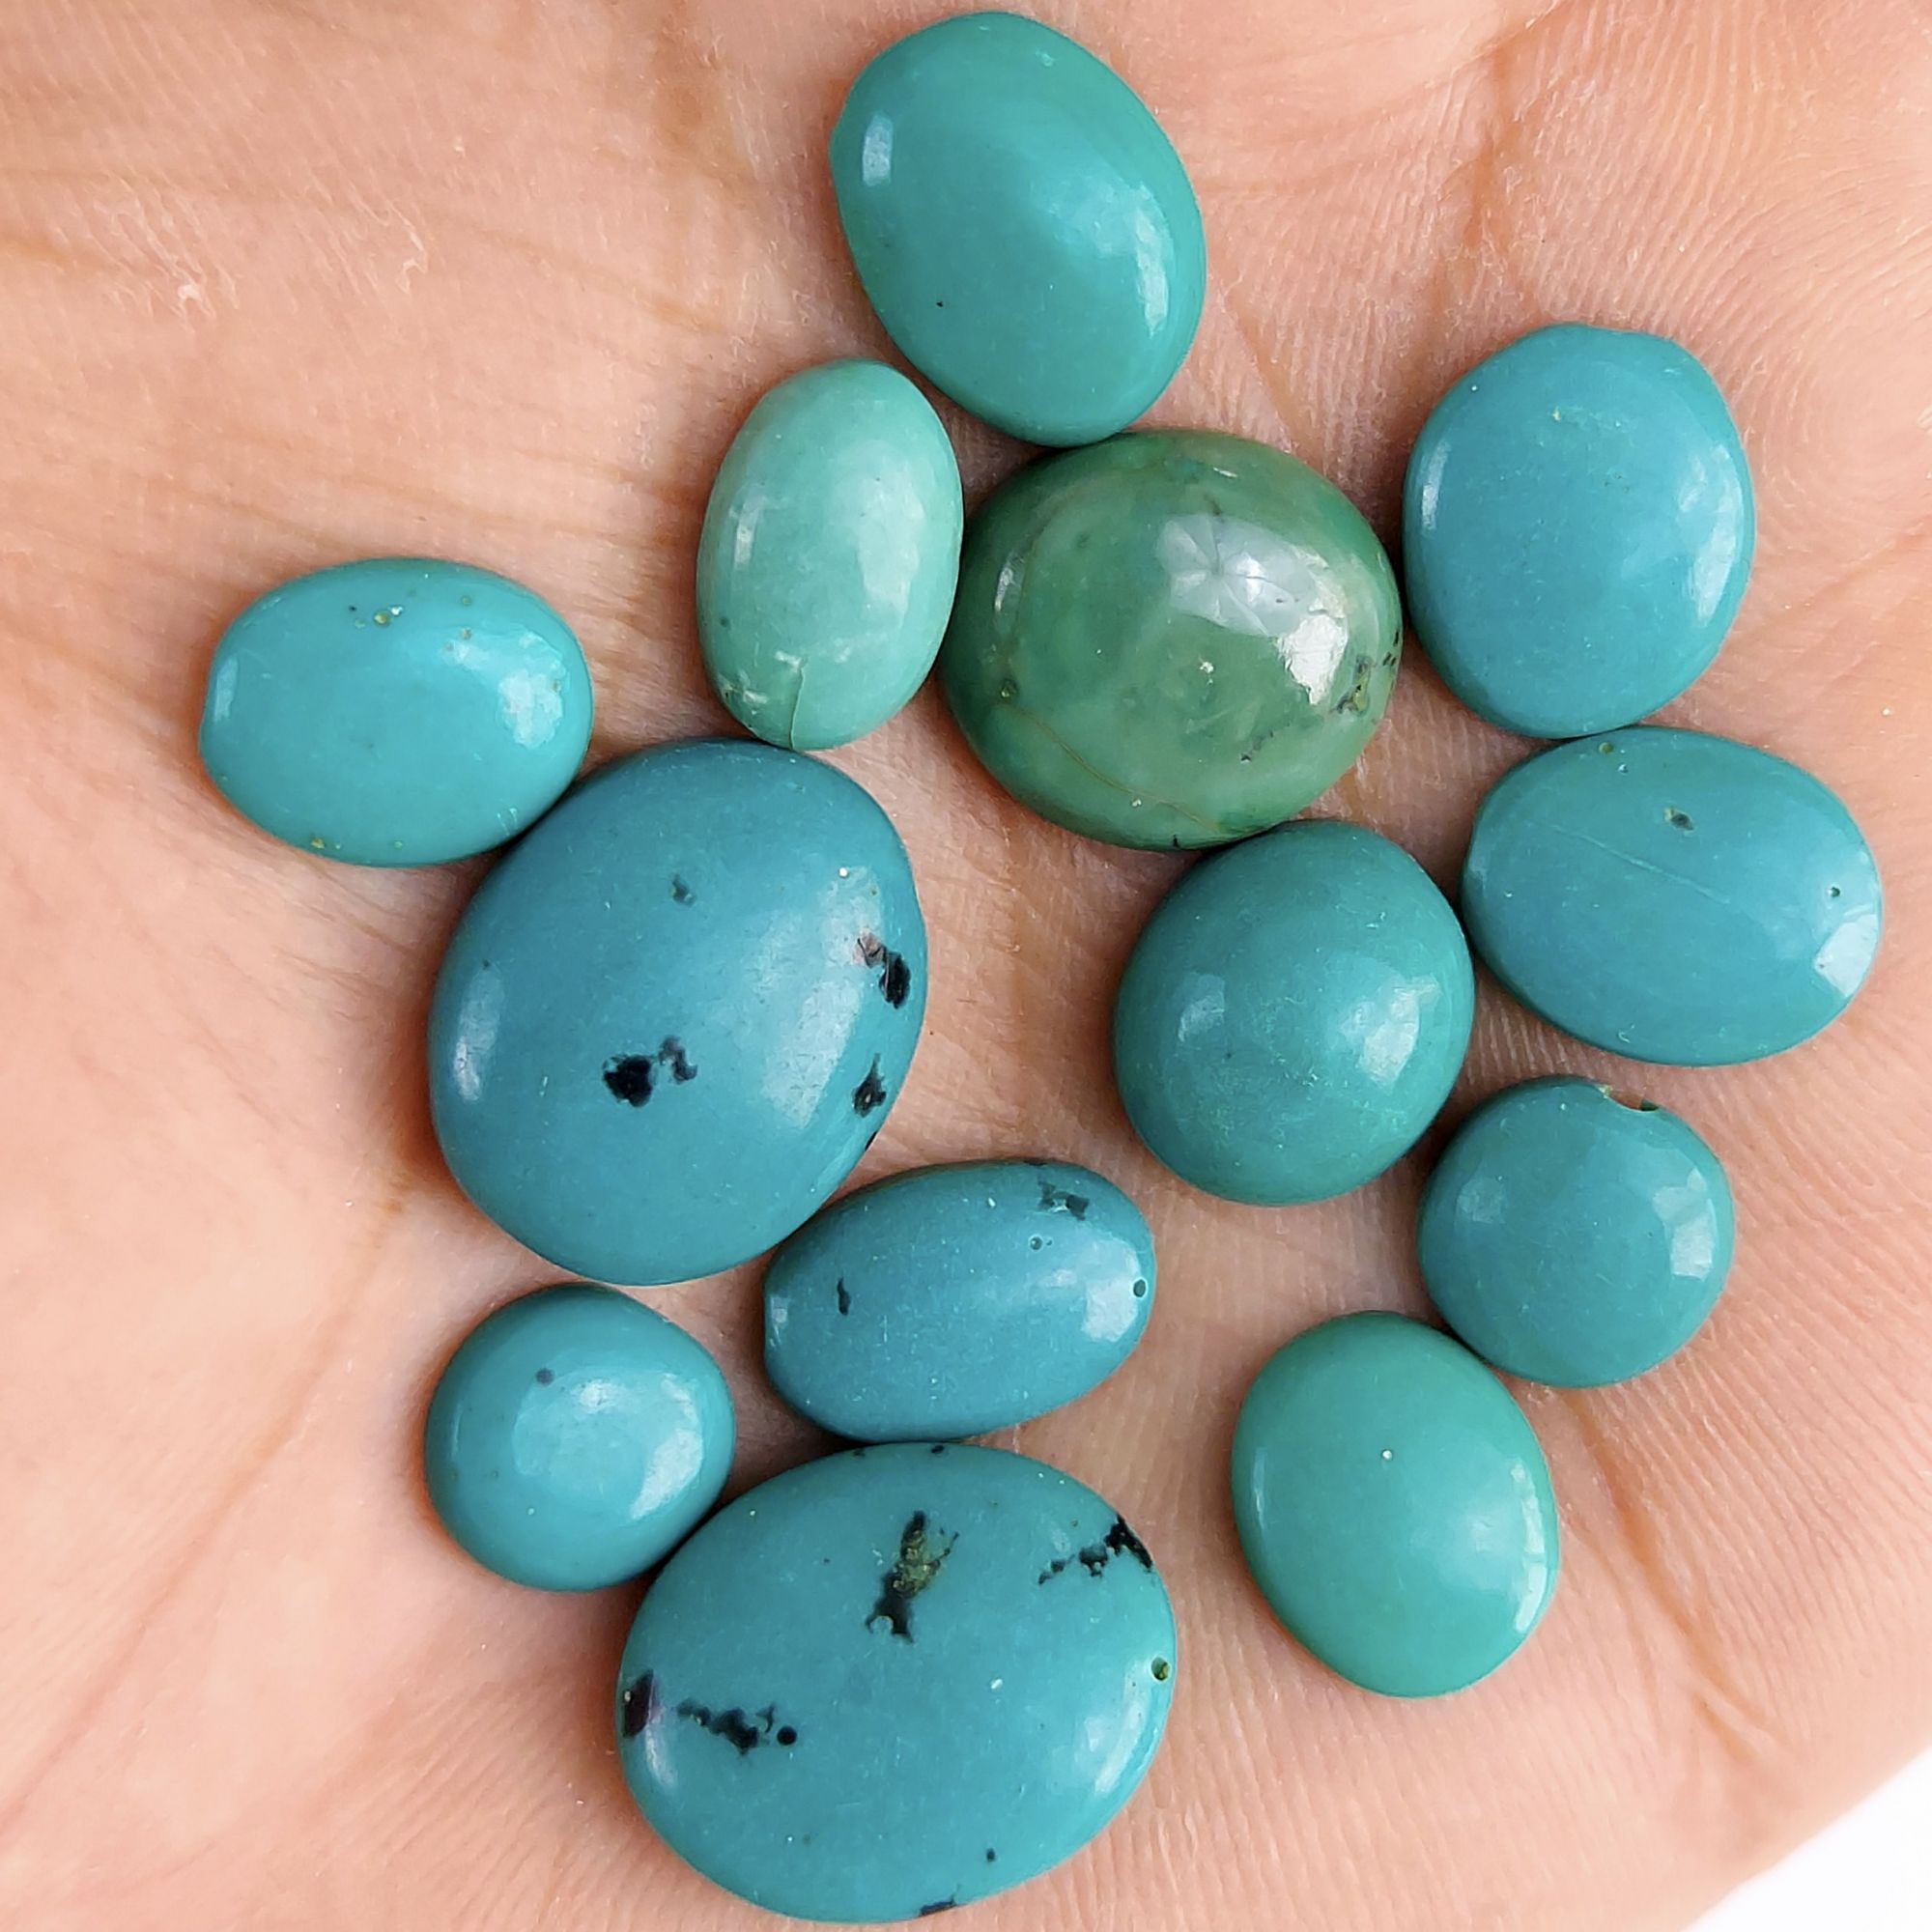 13Pcs 58Cts  Natural Green Tibet Turquoise Loose Cabochon Gemstone Lot For Jewelry Making 15x11 6x6mm#620